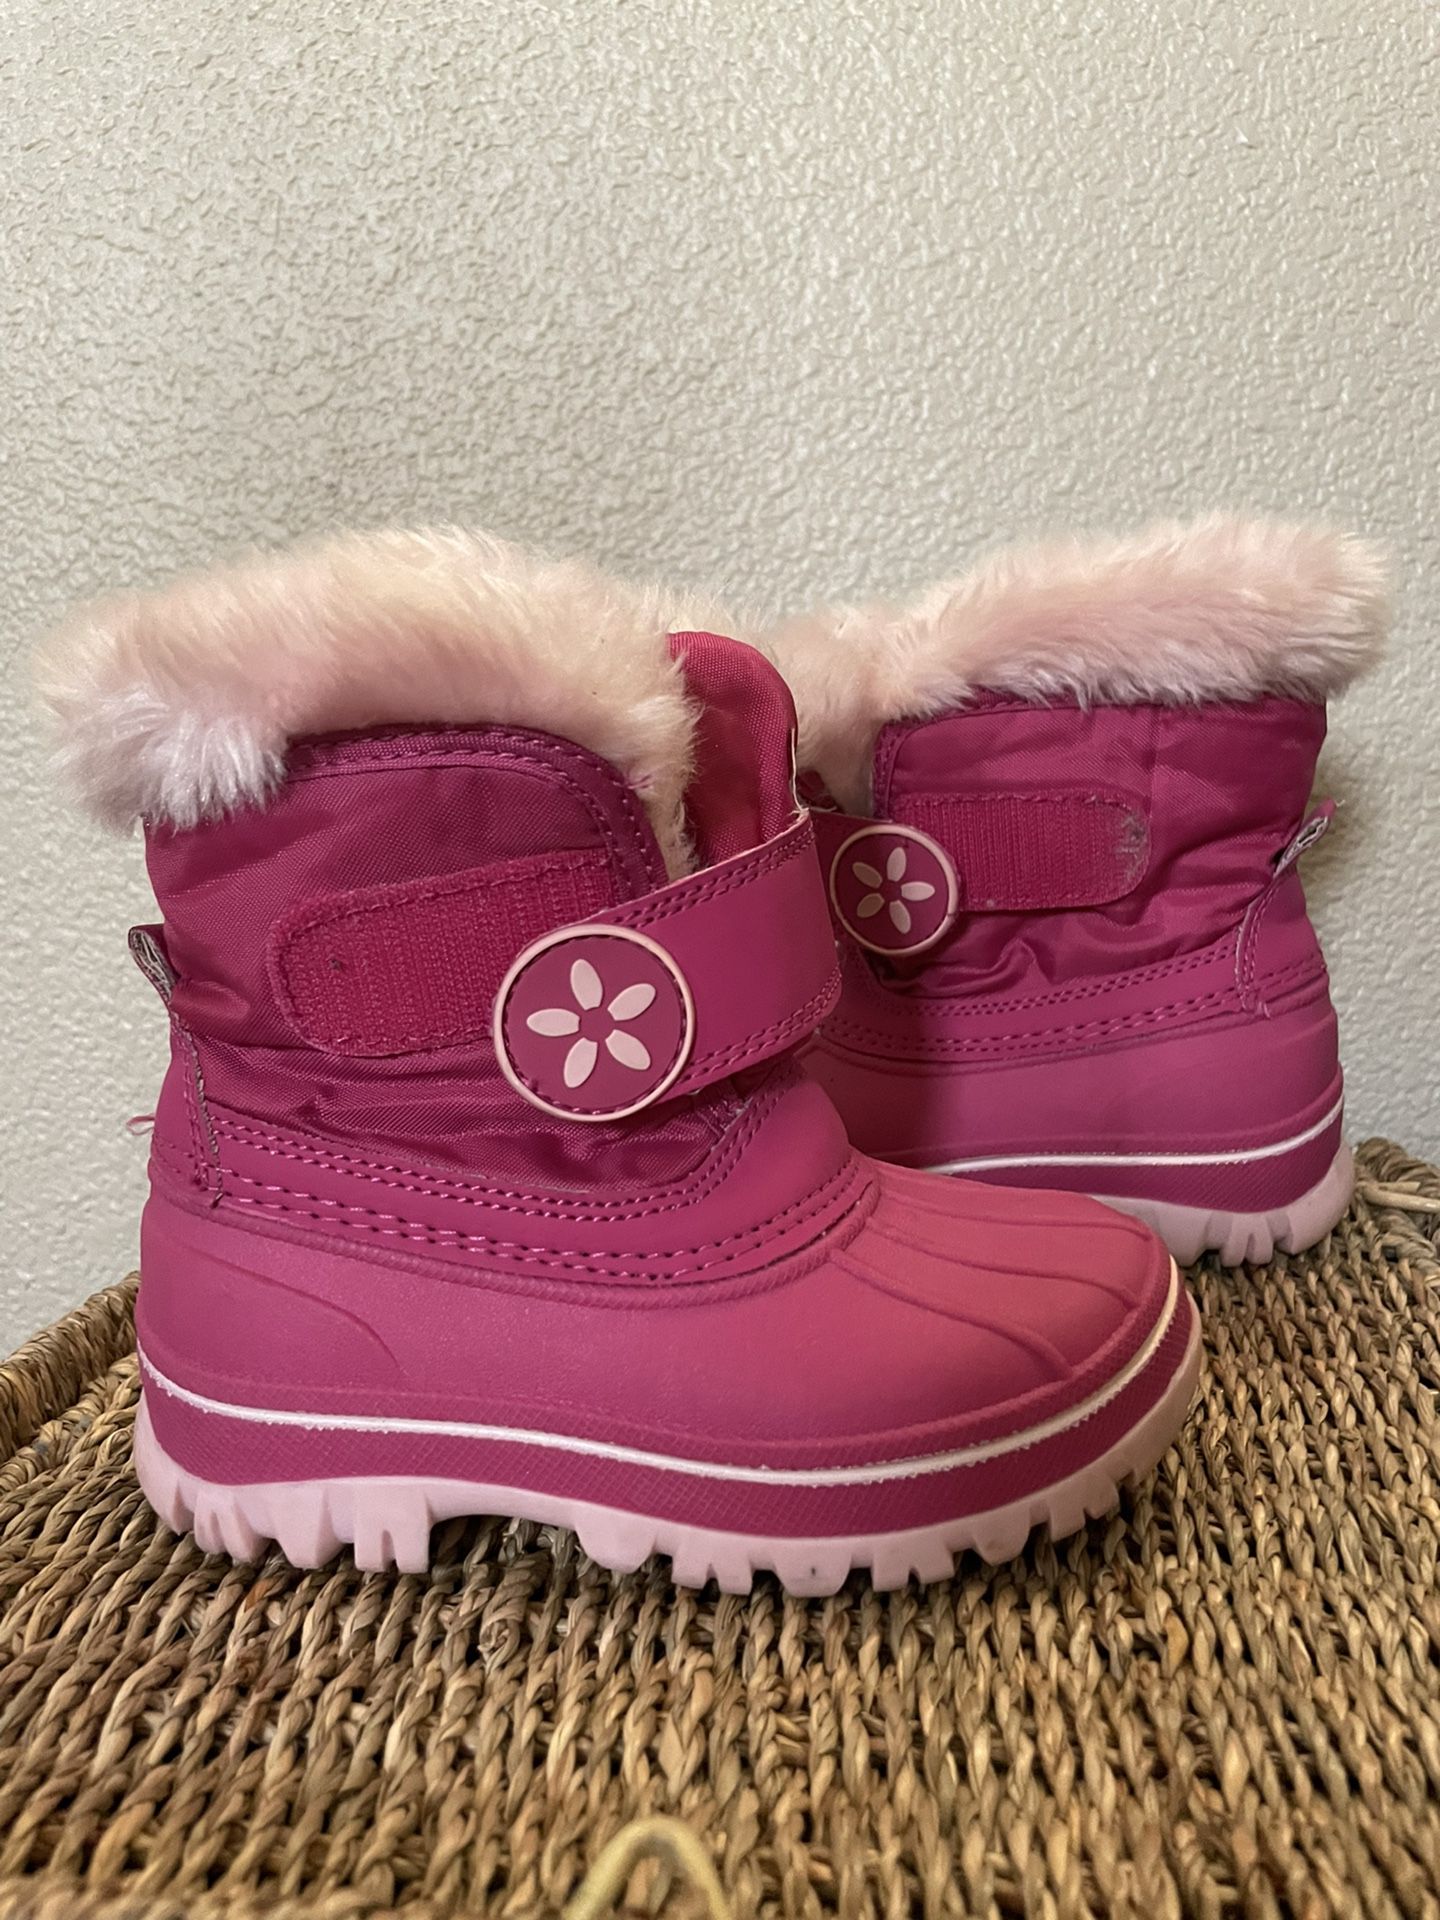 Girl Snow Boots / Size 7-8toddlers 